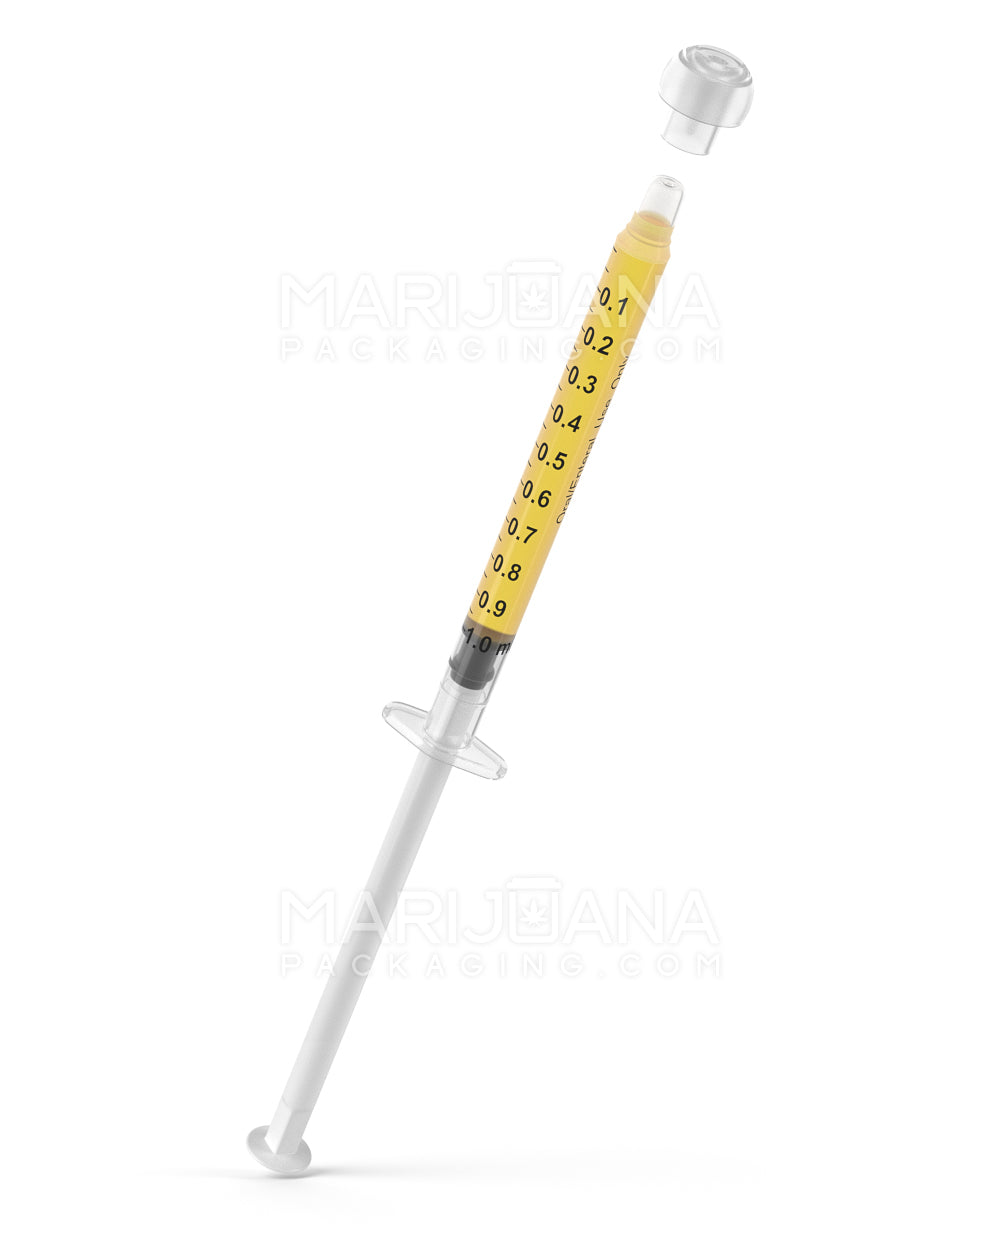 Plastic Oral Concentrate Syringes | 1mL - 0.1mL Increments | Sample - 6